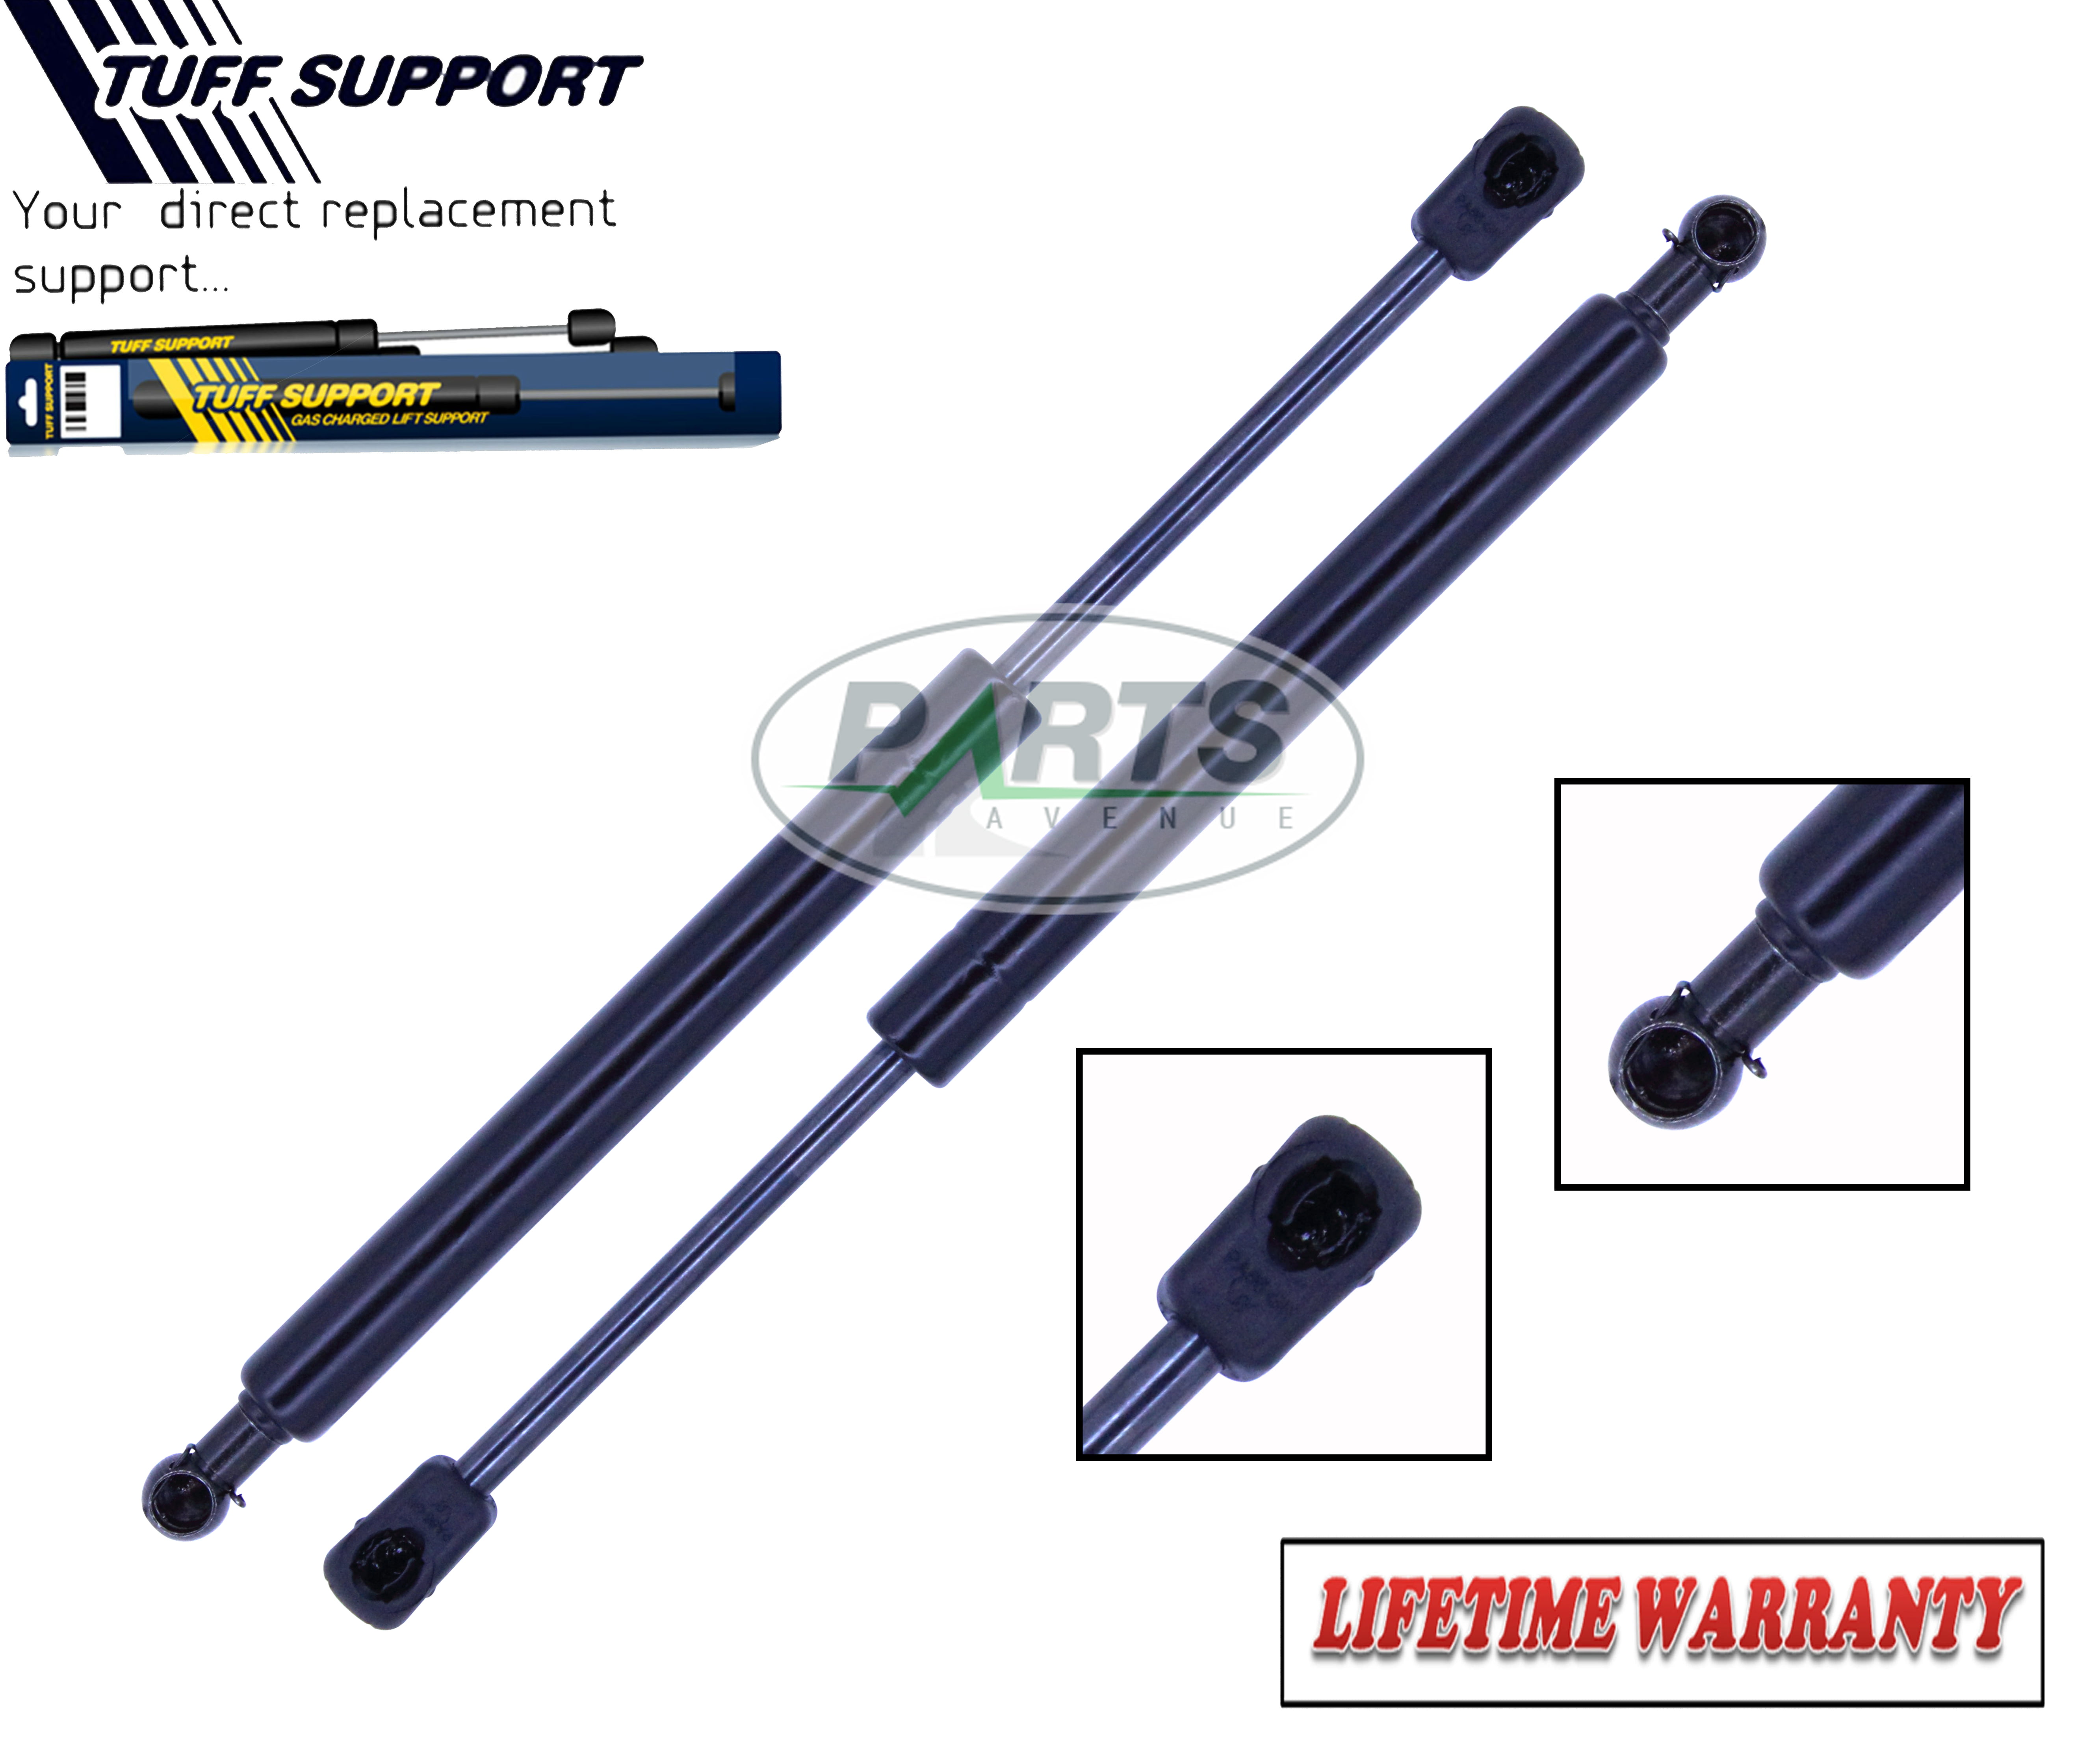 2 Pieces Tuff Support Rear Hatch Lift Supports 2003 To 2006 Hyundai Accent SET 